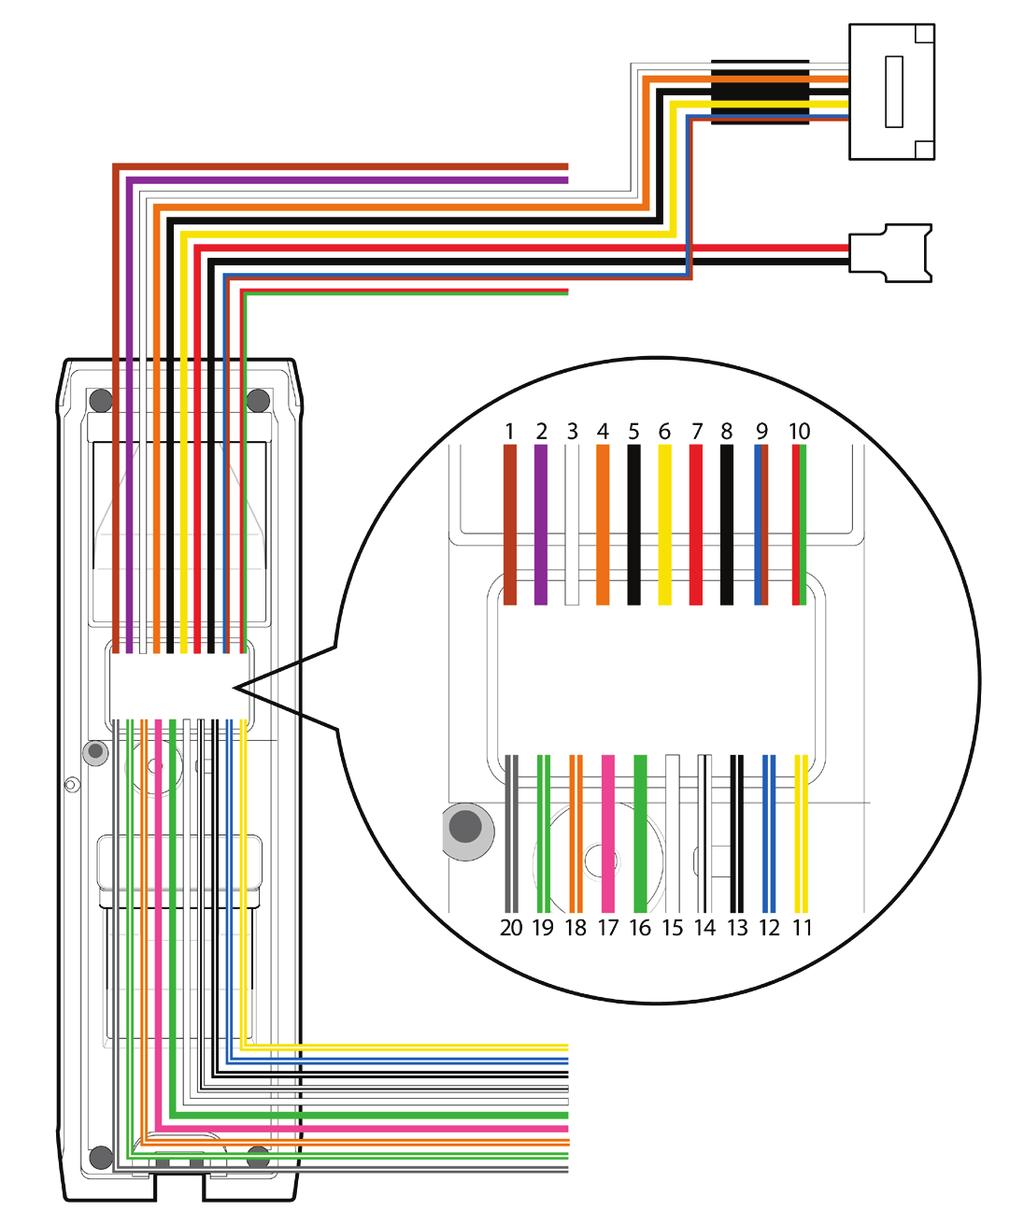 Getting Started Cables and connectors Pin Name Color 1 TTL IN1 Brown 2 TTL IN0 Purple 3 ENET TXP White 4 ENET TXN Orange 5 ENET RXP Black 6 ENET RXN Yellow 7 PWR +VDC Red 8 PWR GND Black 9 10 VB2 VB2